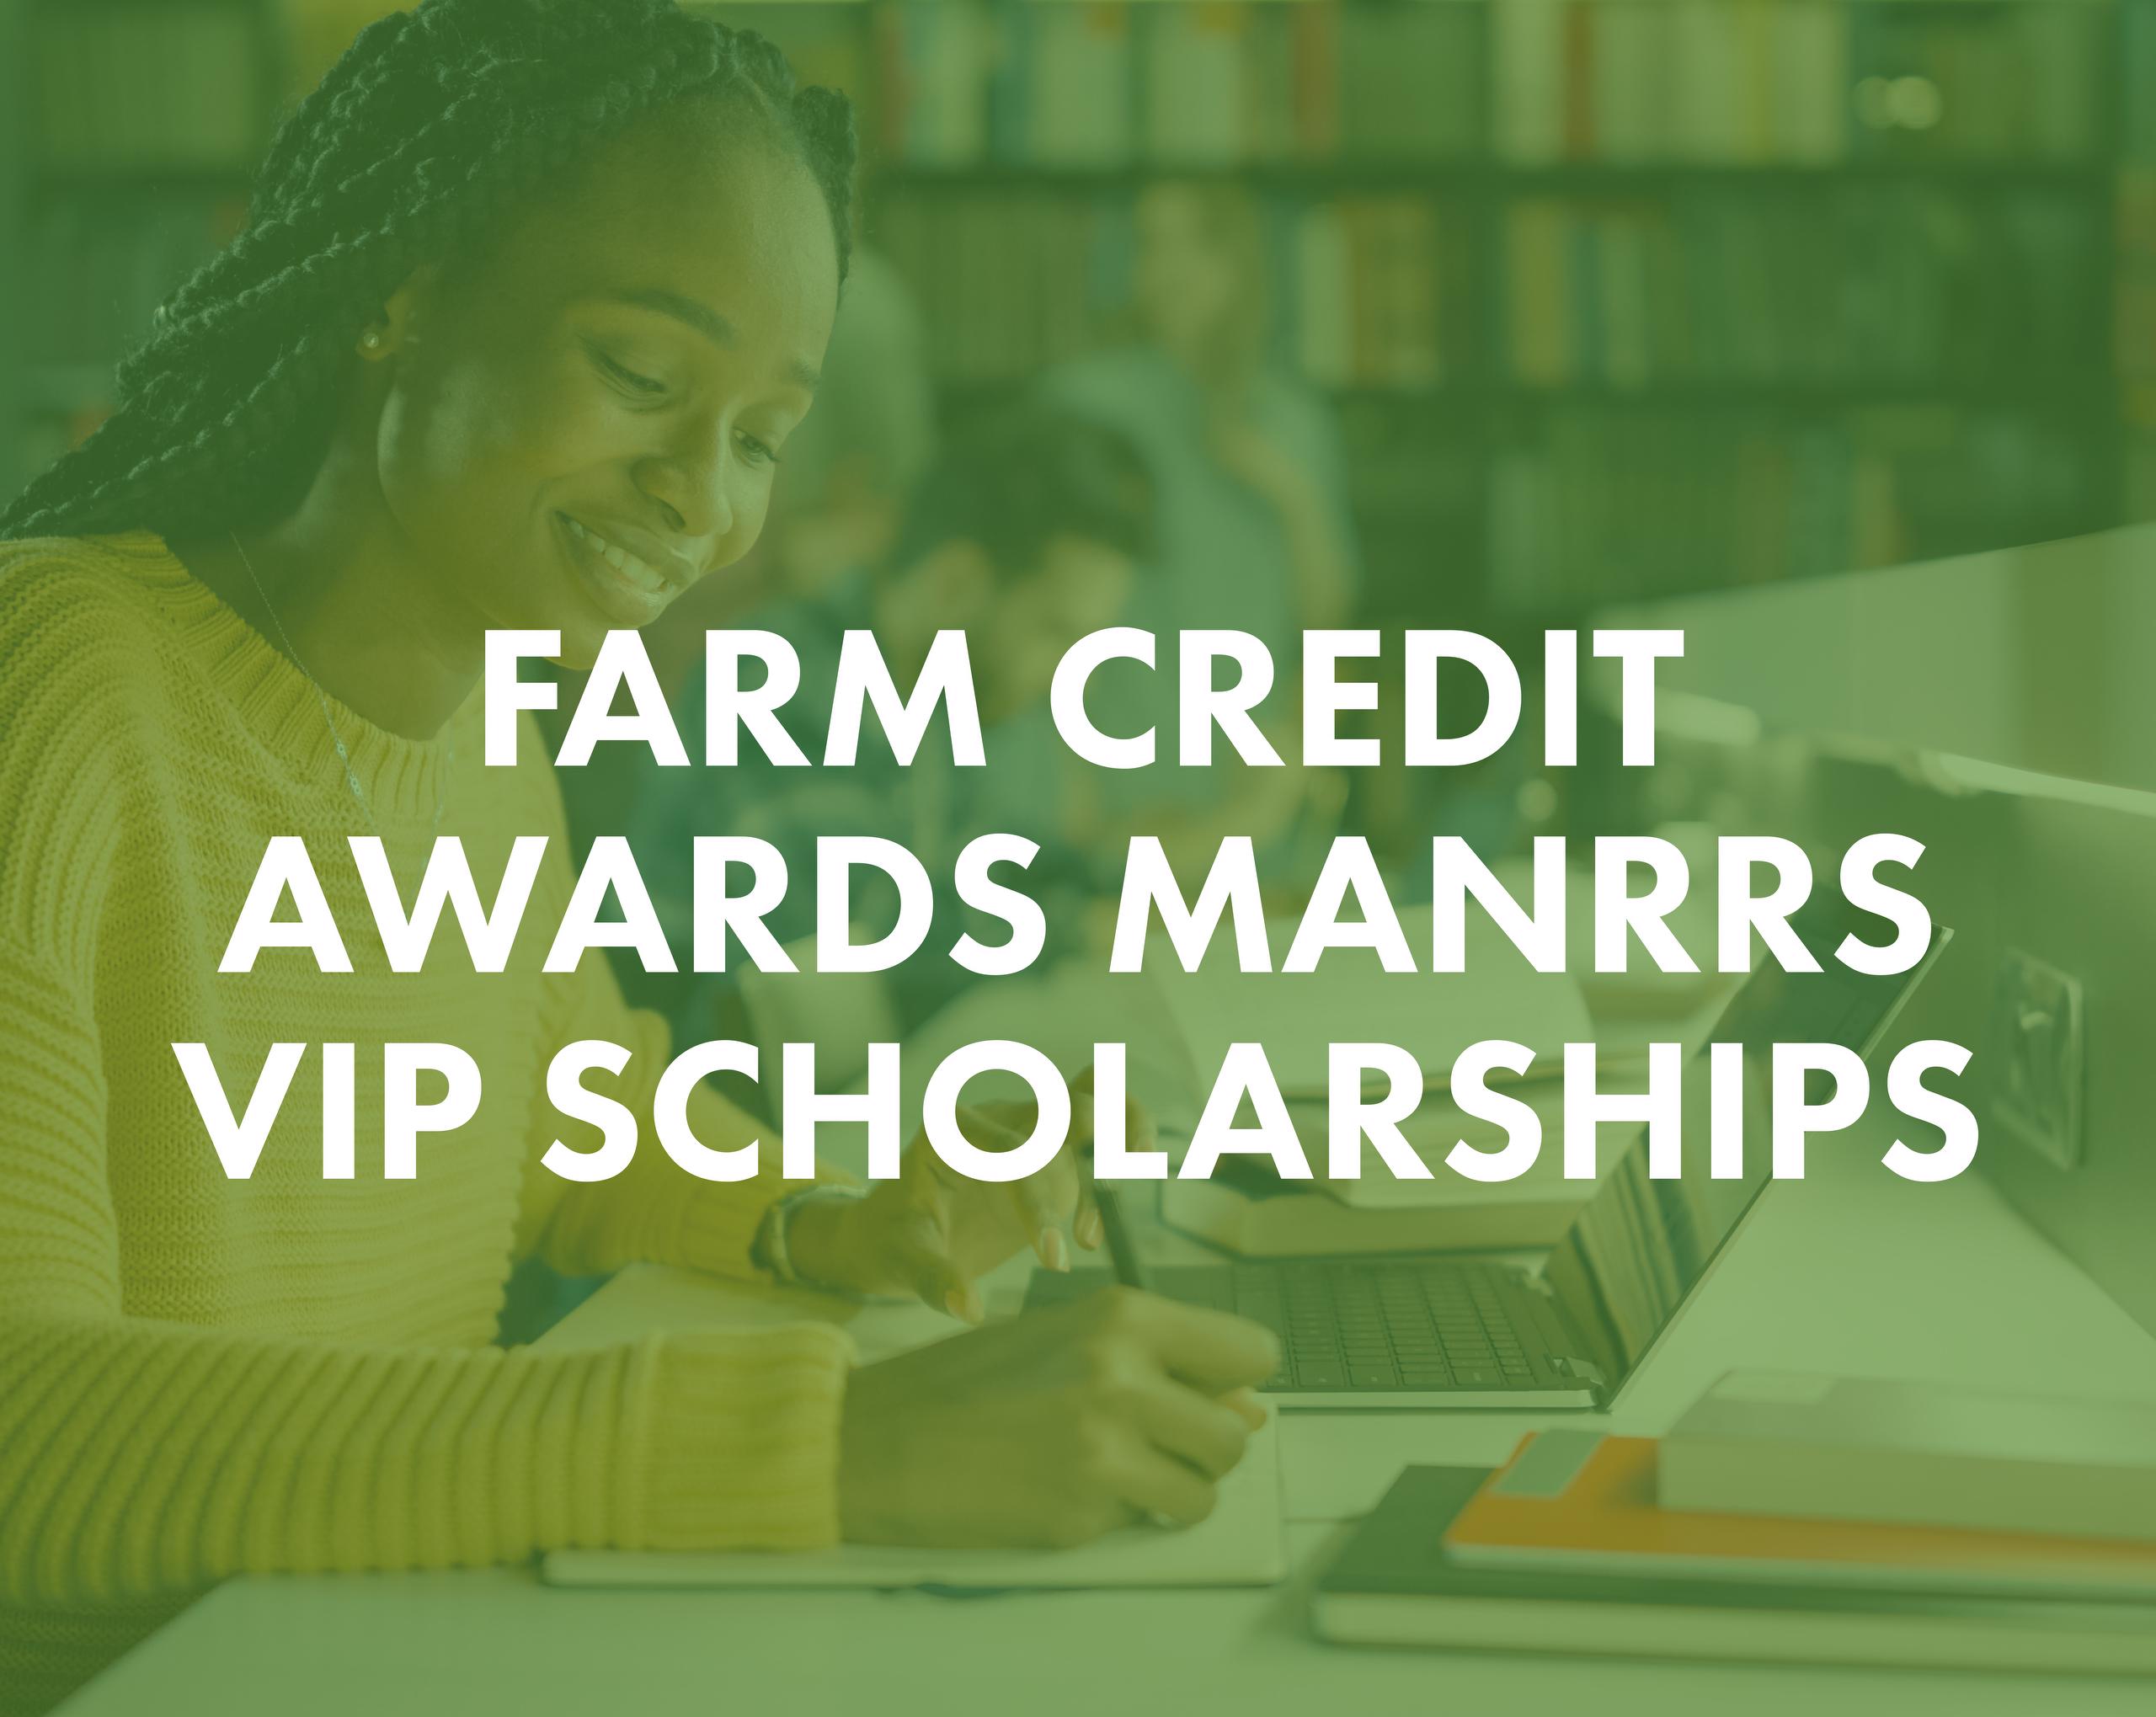 Student studying at table, text reads "Farm Credit awards MANRRS VIP Scholarships"